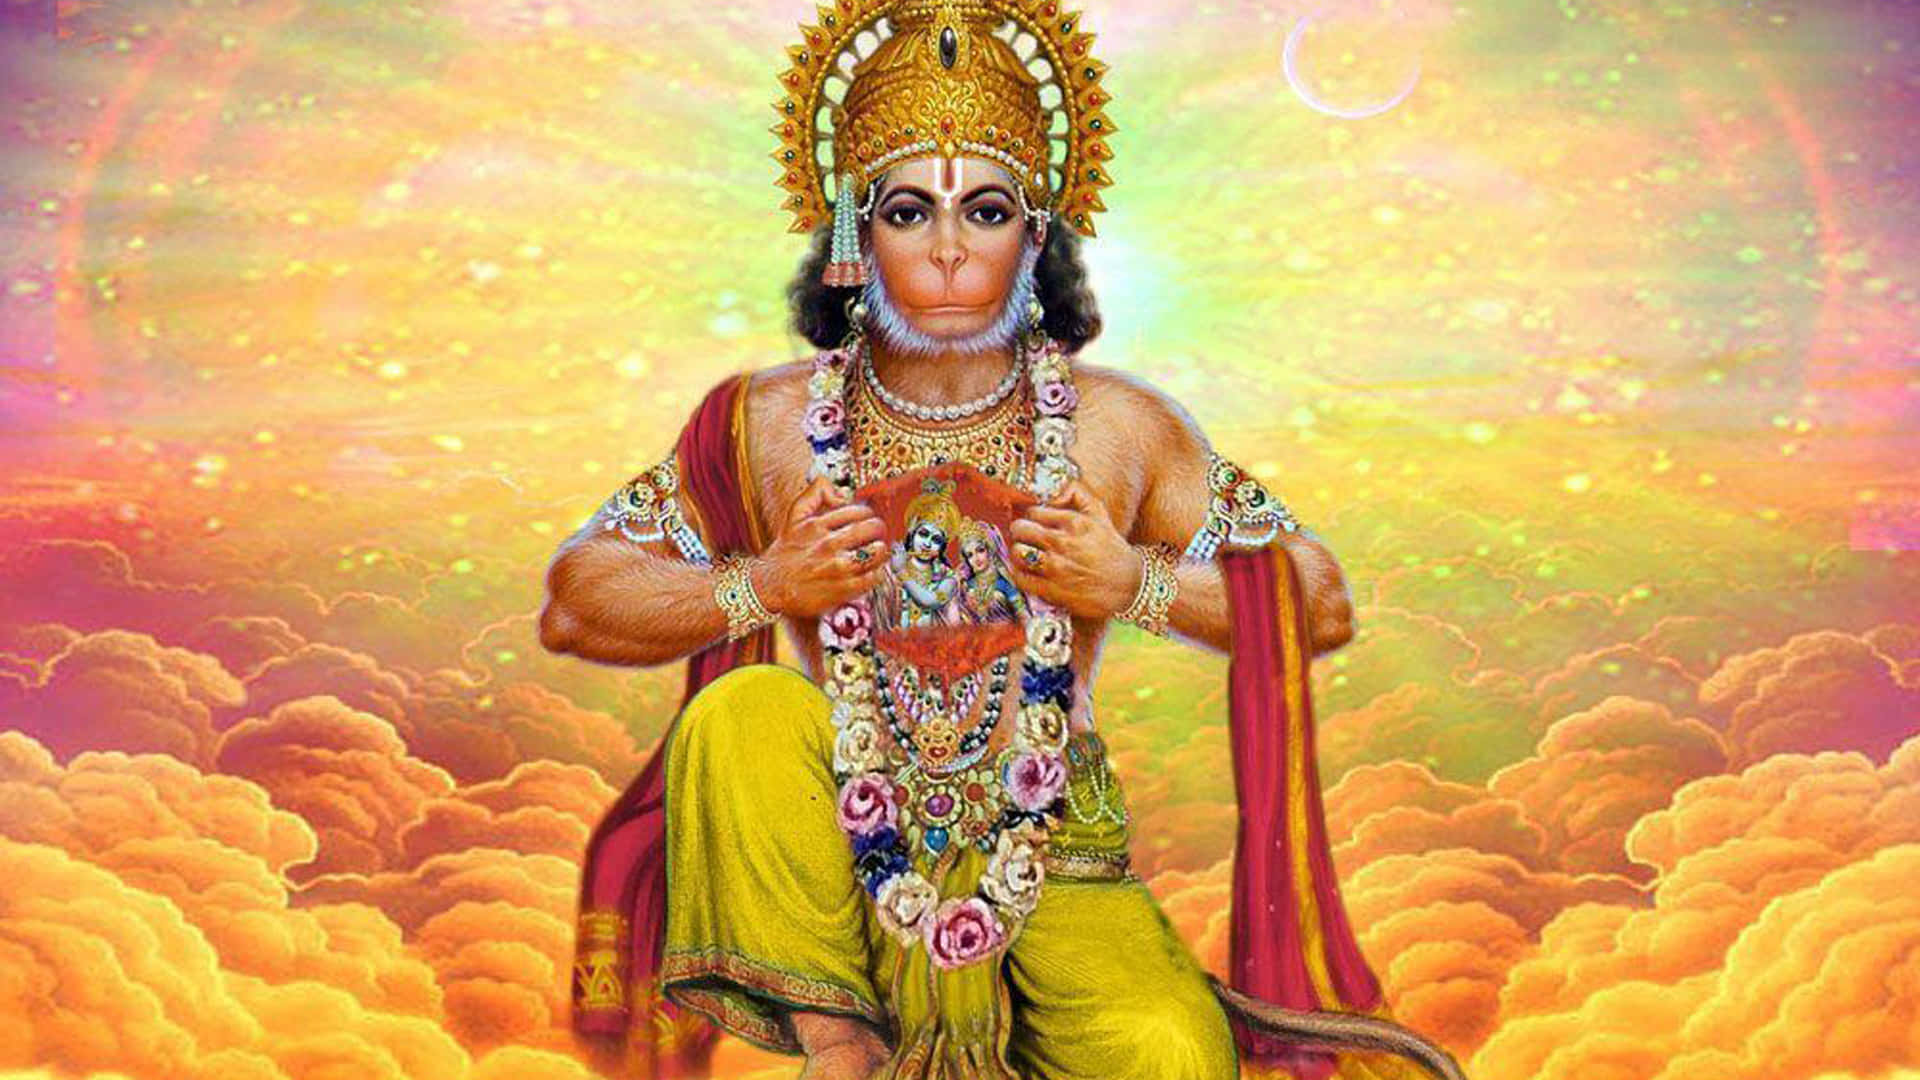 Picture Of Hanuman In The Clouds